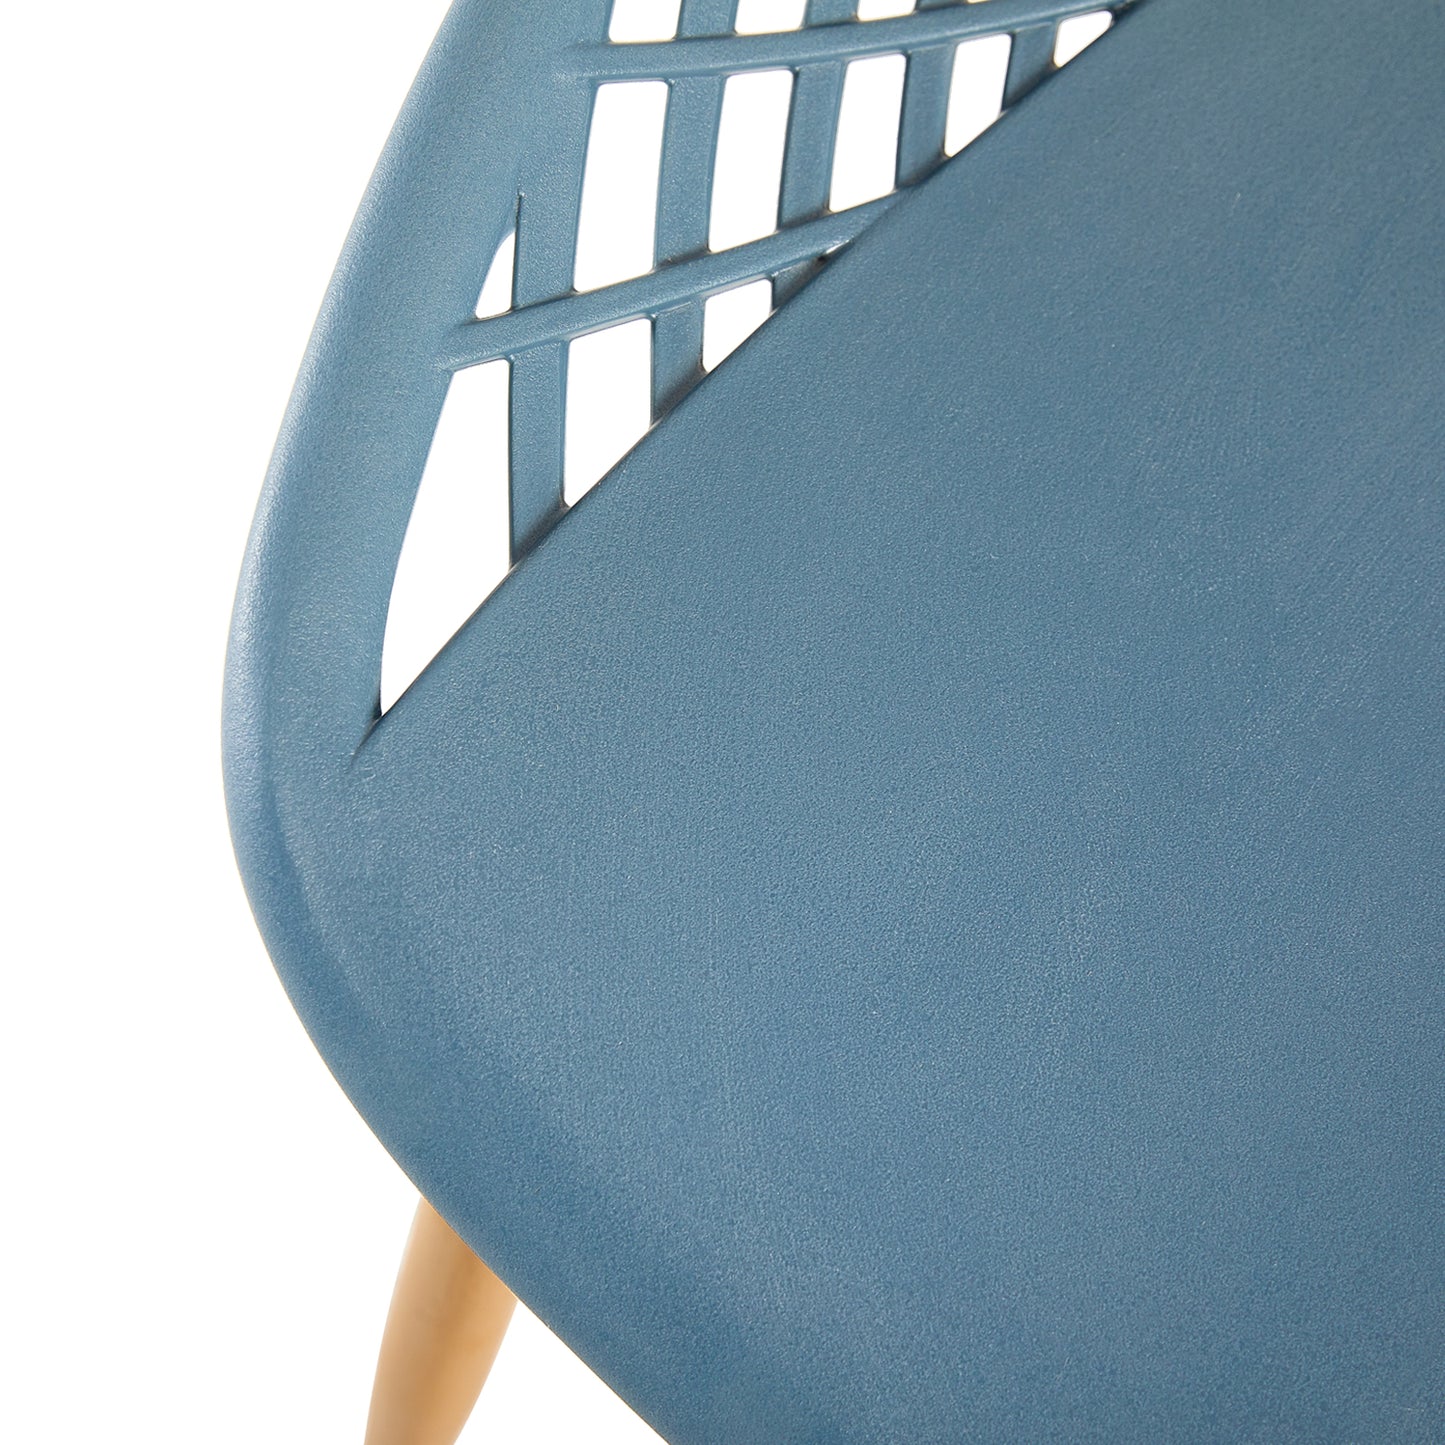 MILAN Hollow Chair with Iron Legs - Light Gray Blue